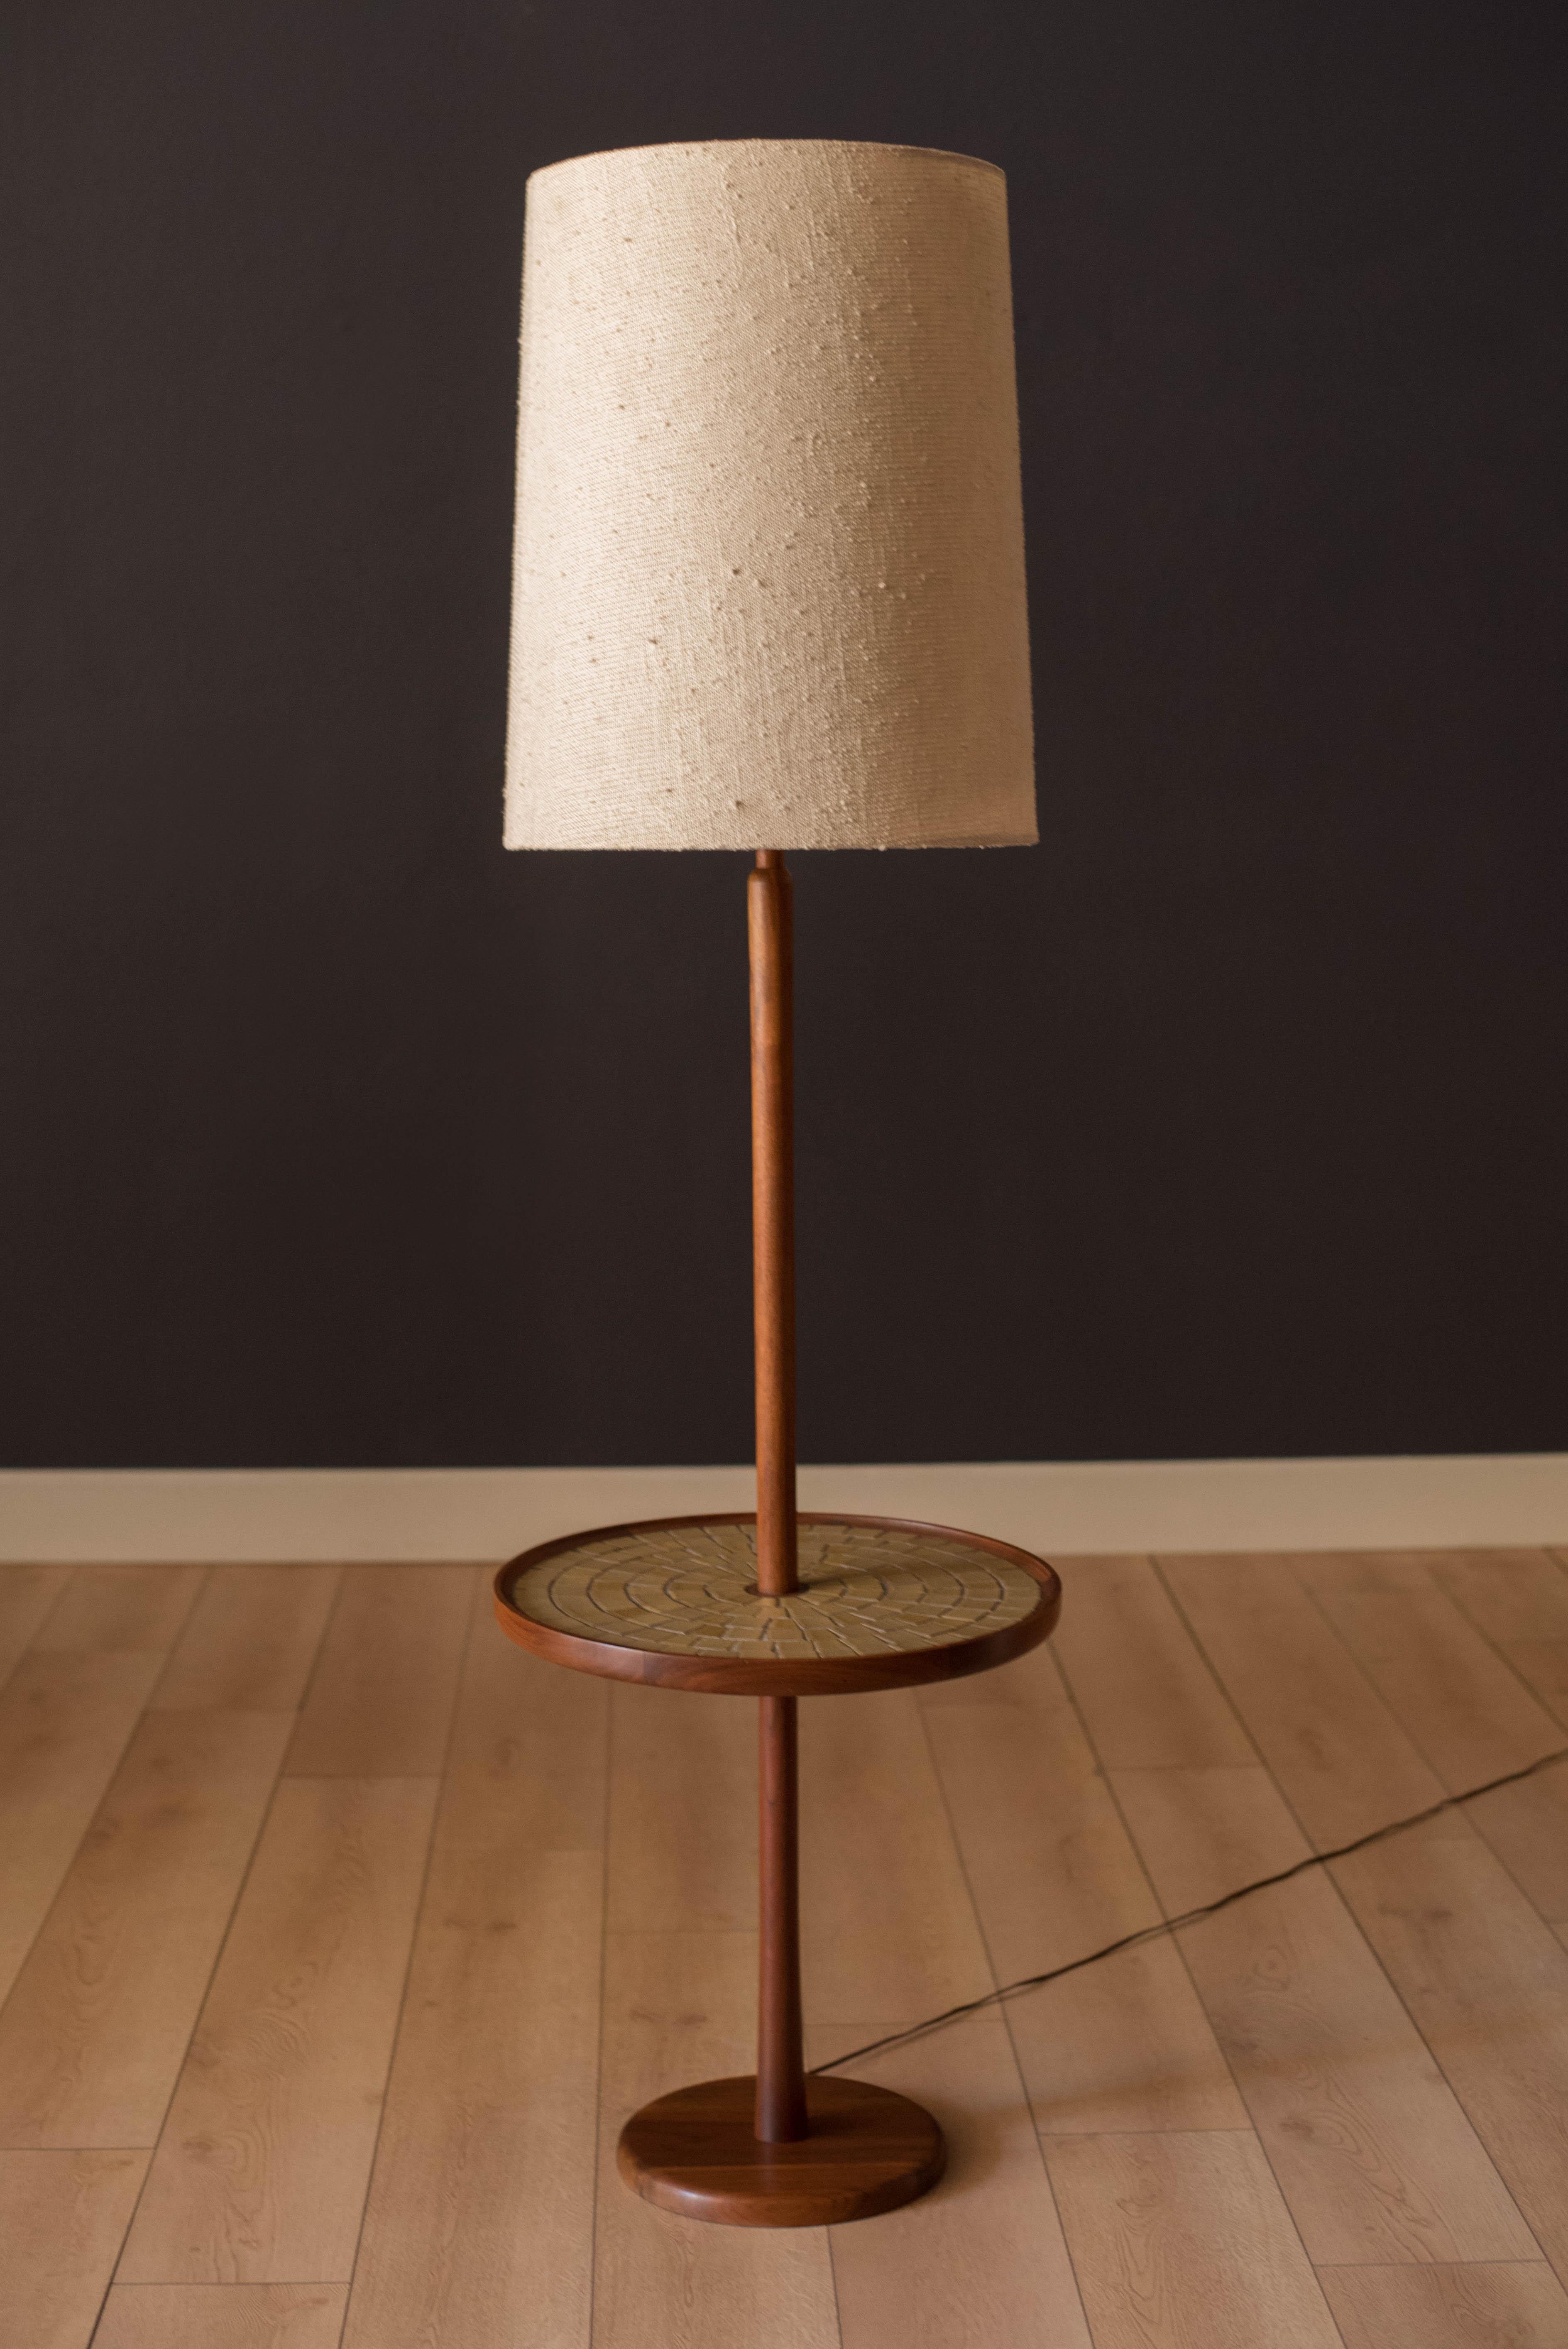 Mid-Century Modern floor lamp with attached round side table designed by Jane and Gordon Martz for Marshall Studios. This versatile piece features a walnut base and a unique inlay of ceramic tile including signature Martz details. Lamp shade is not